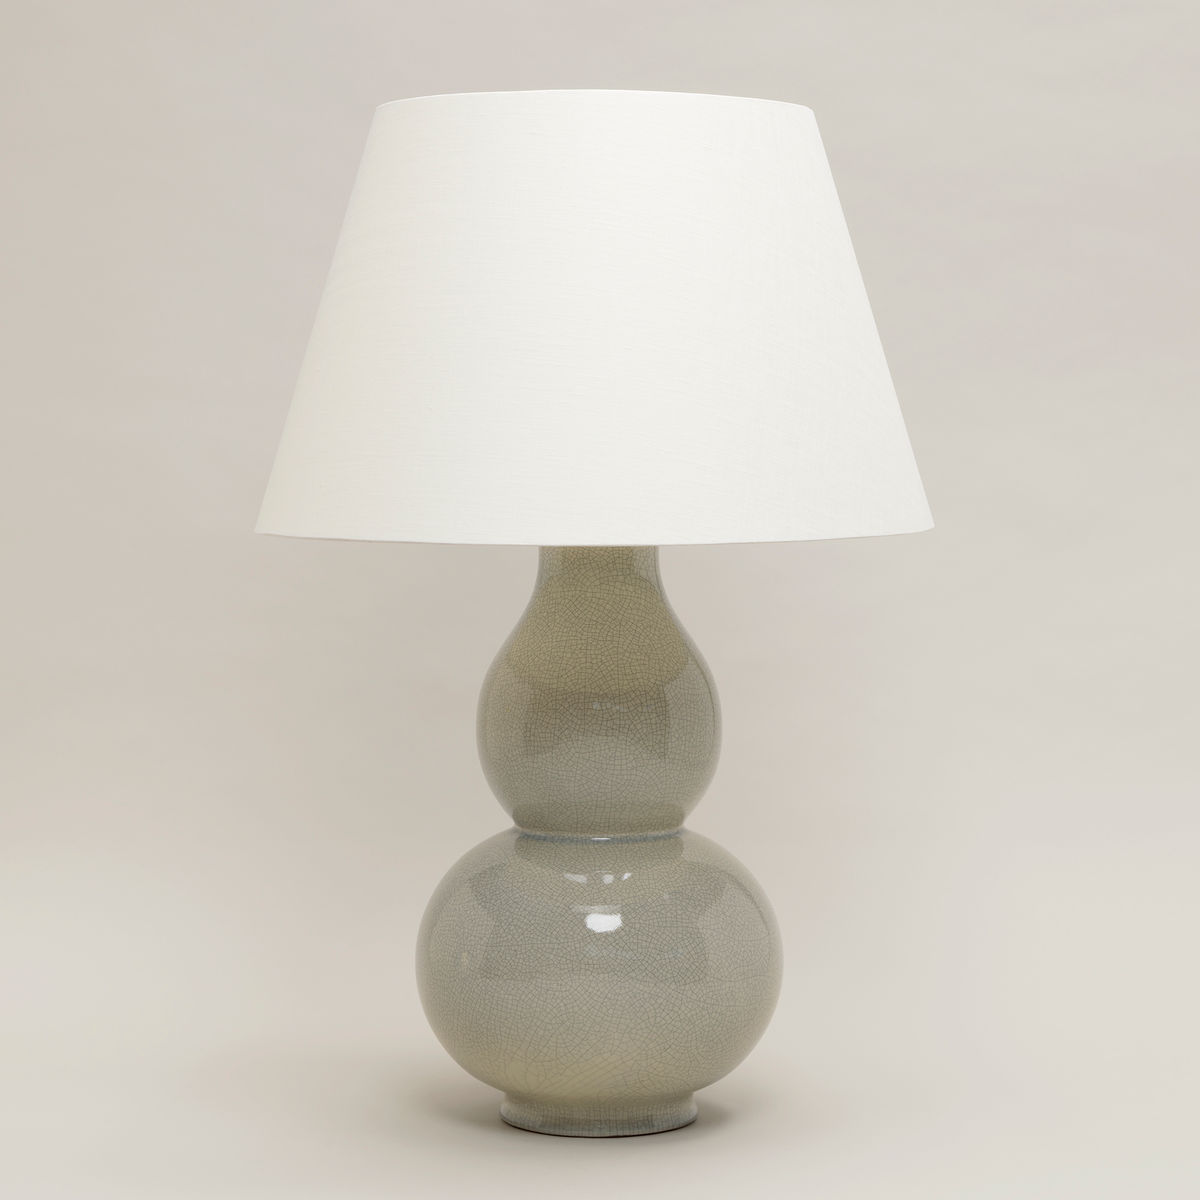 Gourd Shaped Vase Table Lamp in Crackled Stone Colour with Linen Laminated Lampshade